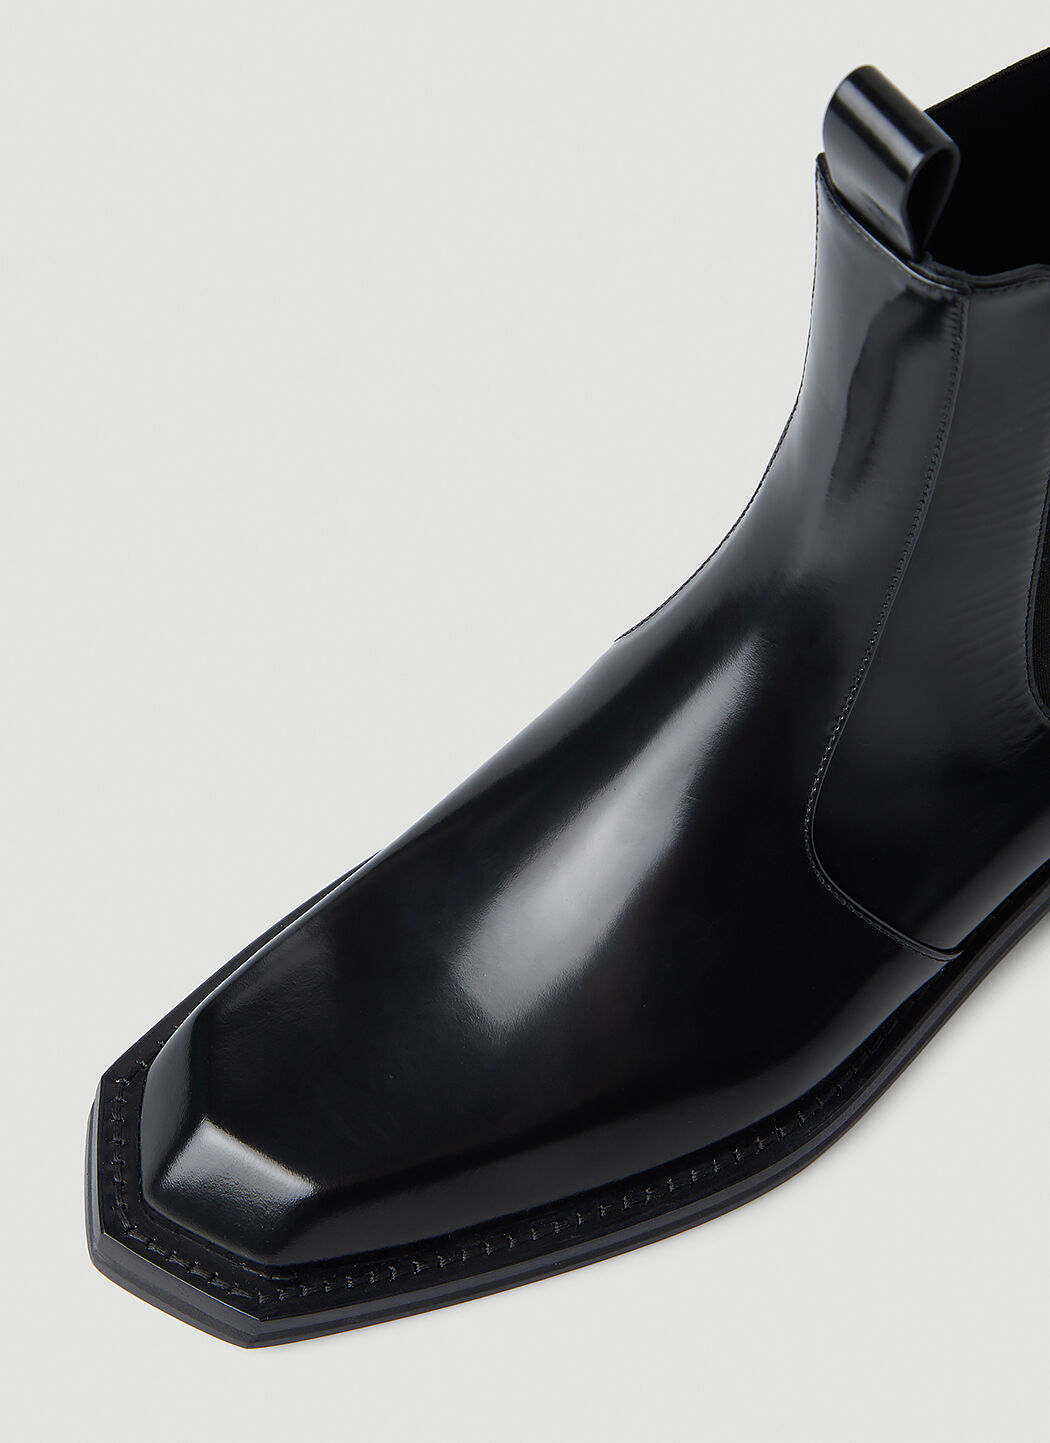 Martine Rose Chisel Toe Chelsea Boots in Black | LN-CC®